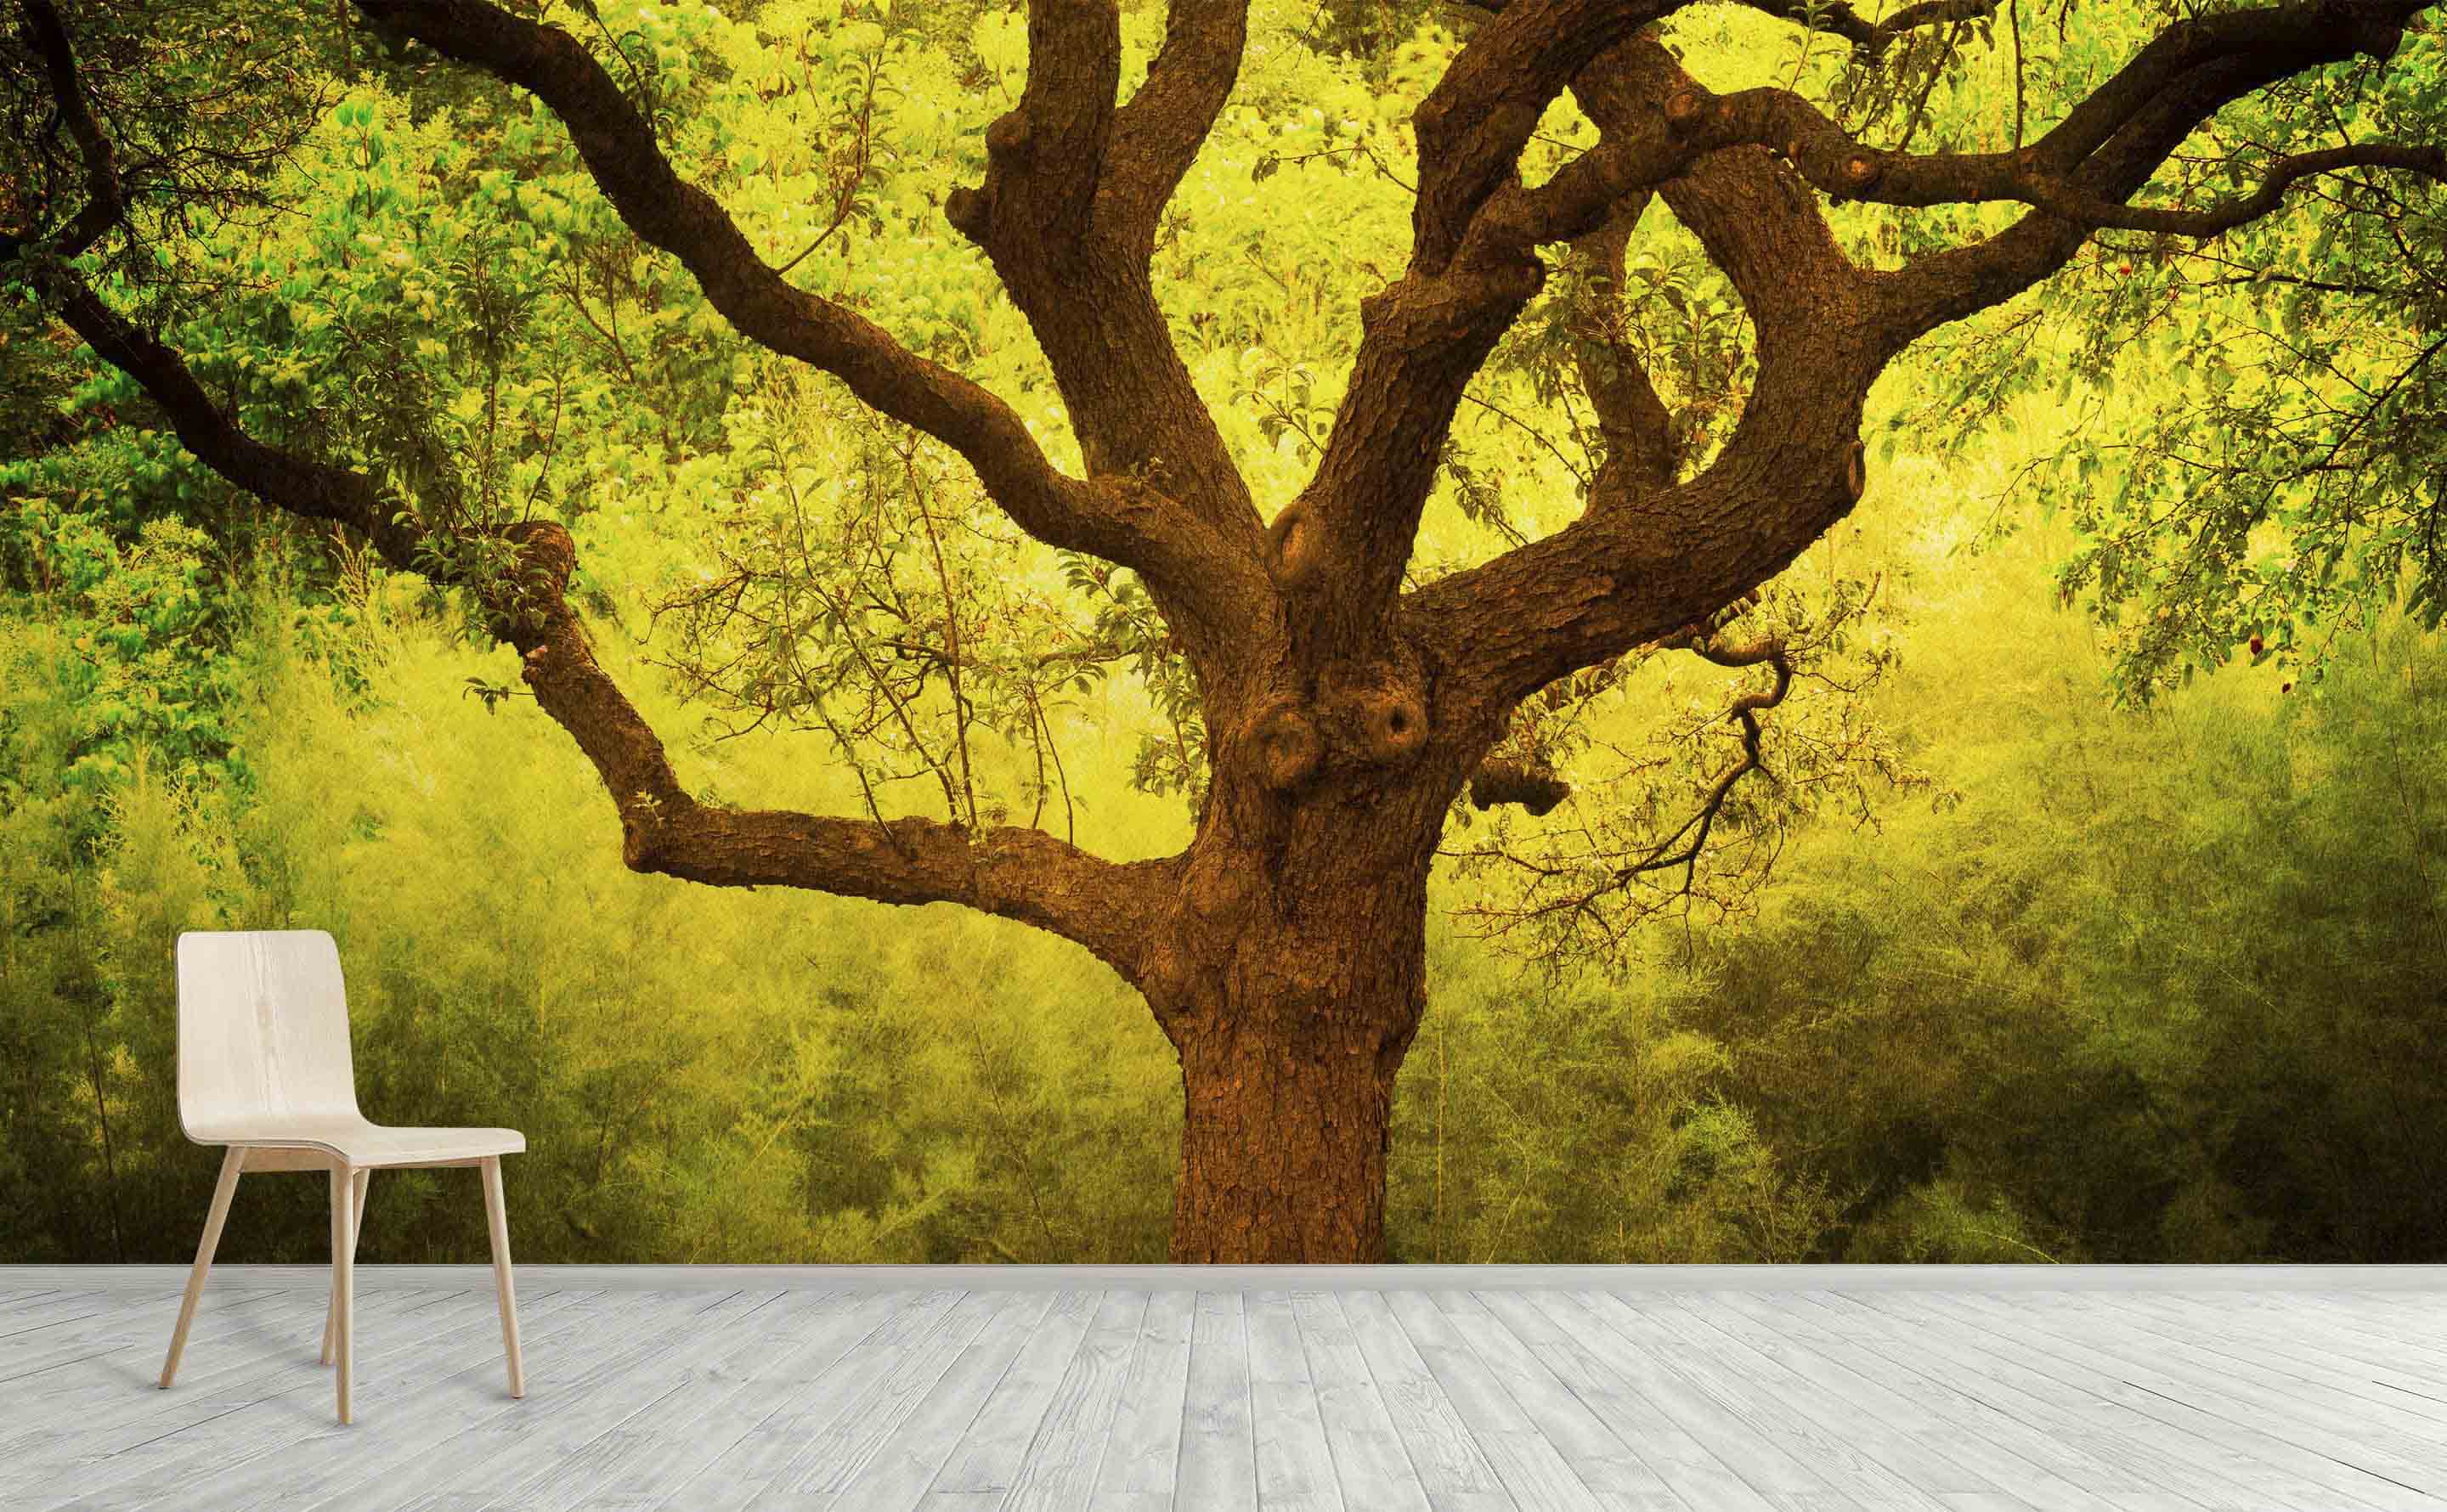 Tree Of Life Cantigney Park Il Wall Mural by Walls Need Love®